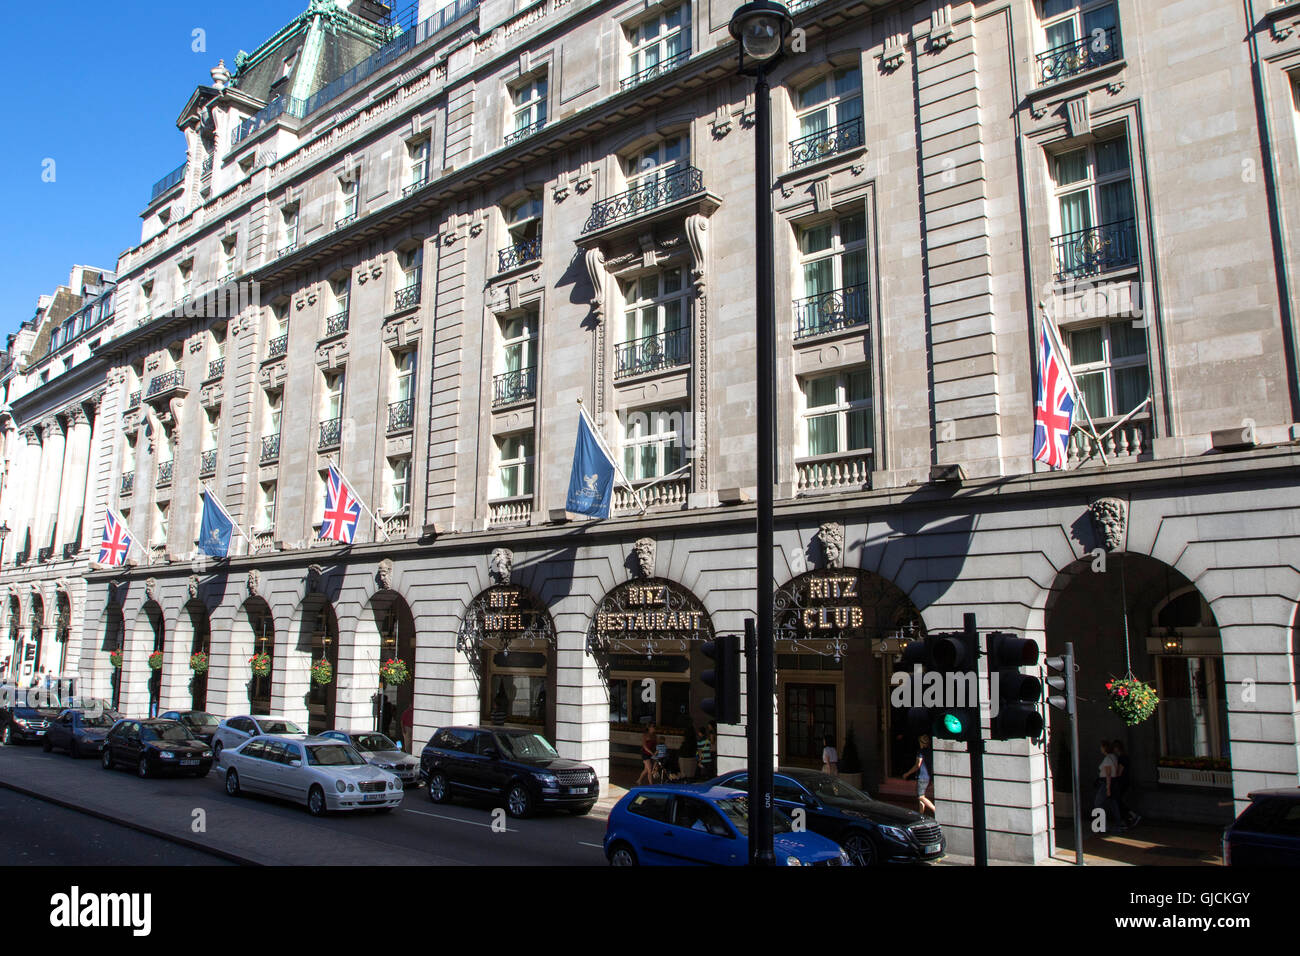 The Ritz Hotel Grade II listed 5 star hotel located in Piccadilly in London showing the Exterior of the restaurant Stock Photo